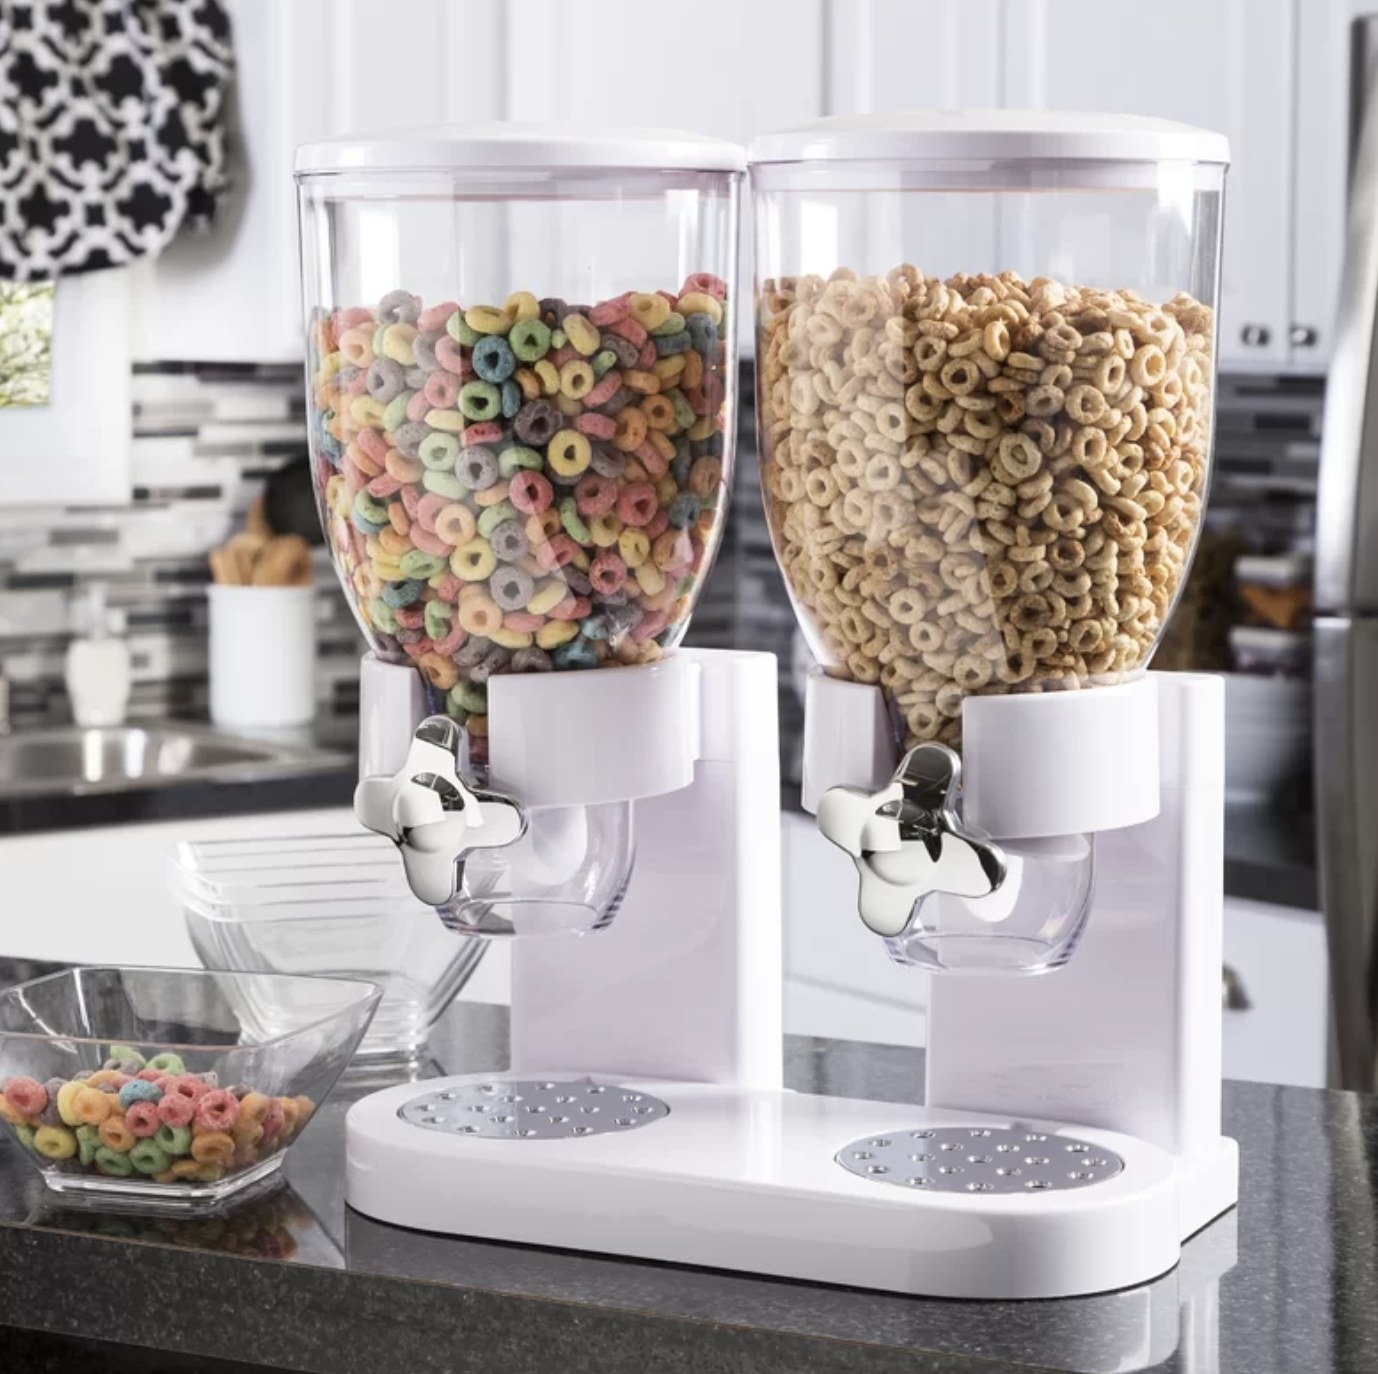 the cereal dispenser filled with cereal